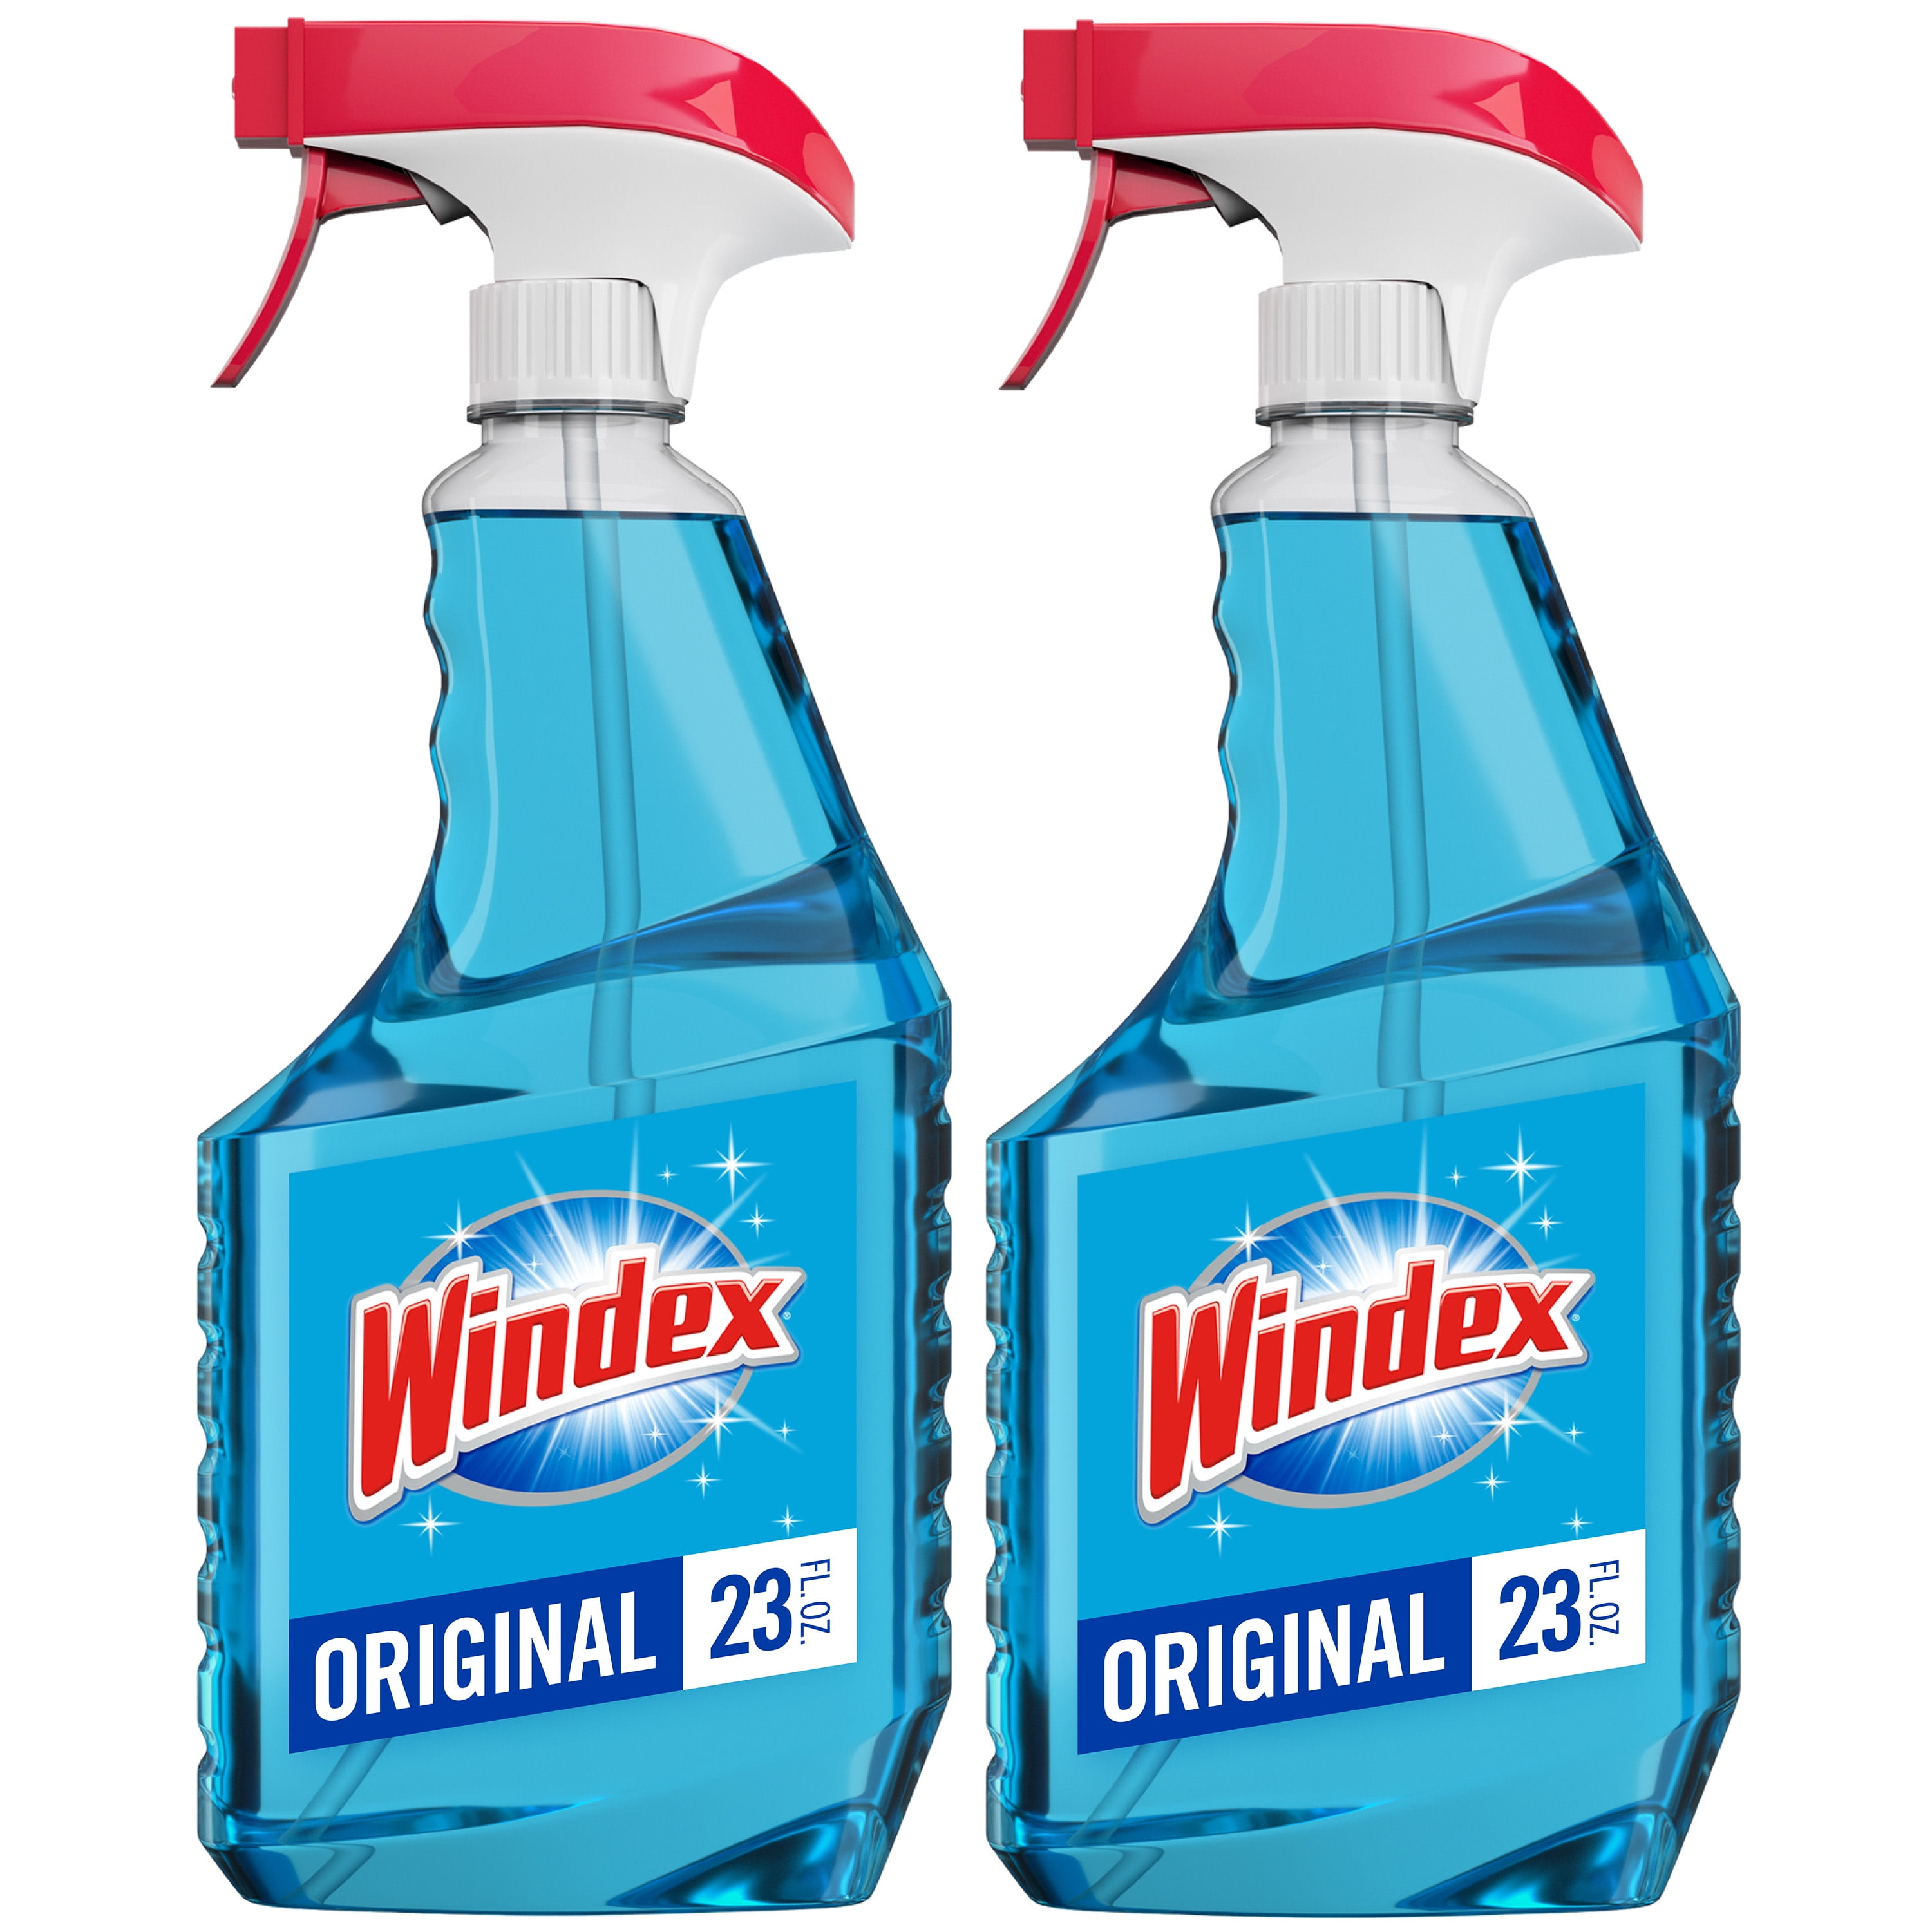 Think Twice Before Adding Windex to your Windshield Wiper Fluid - Glass.com